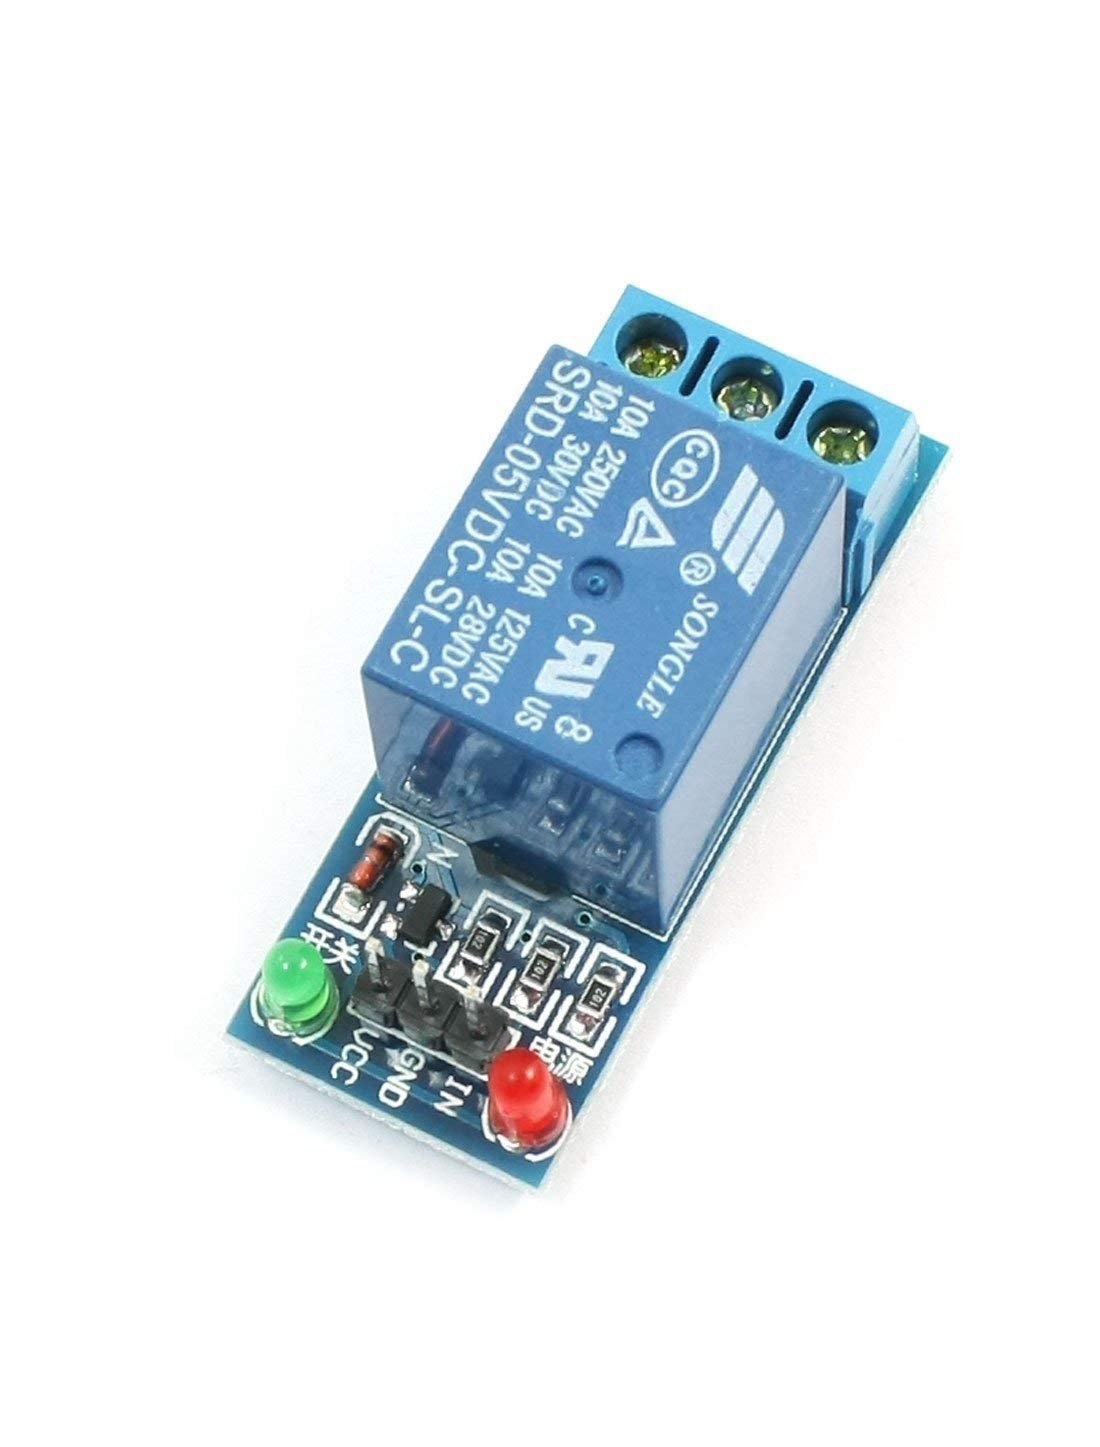  5V Relay One Channel Module for Raspberry Avr Pic Low Level Trigger 